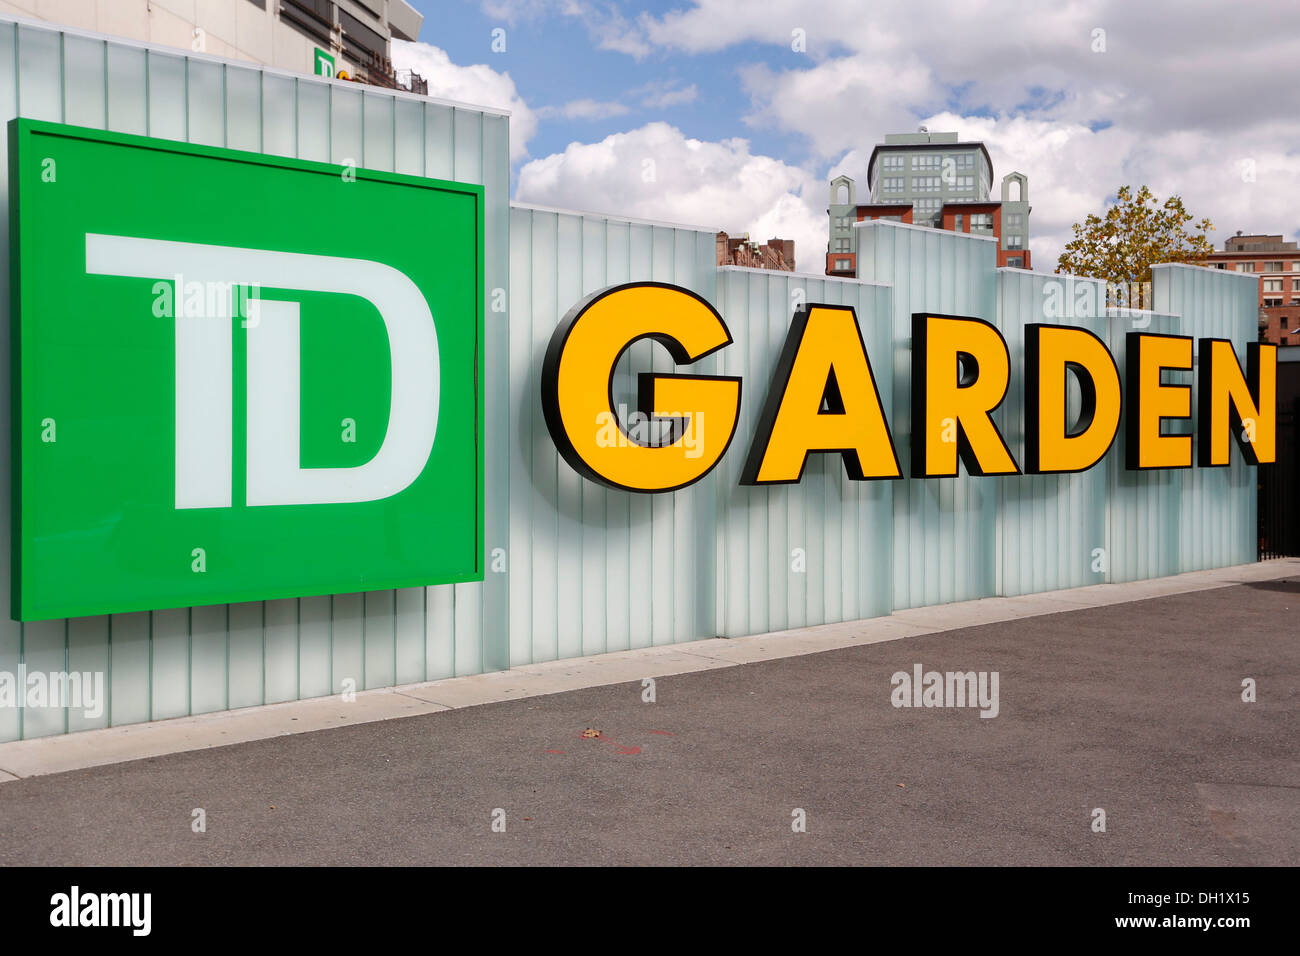 173 Td Garden Exterior Stock Photos, High-Res Pictures, and Images - Getty  Images